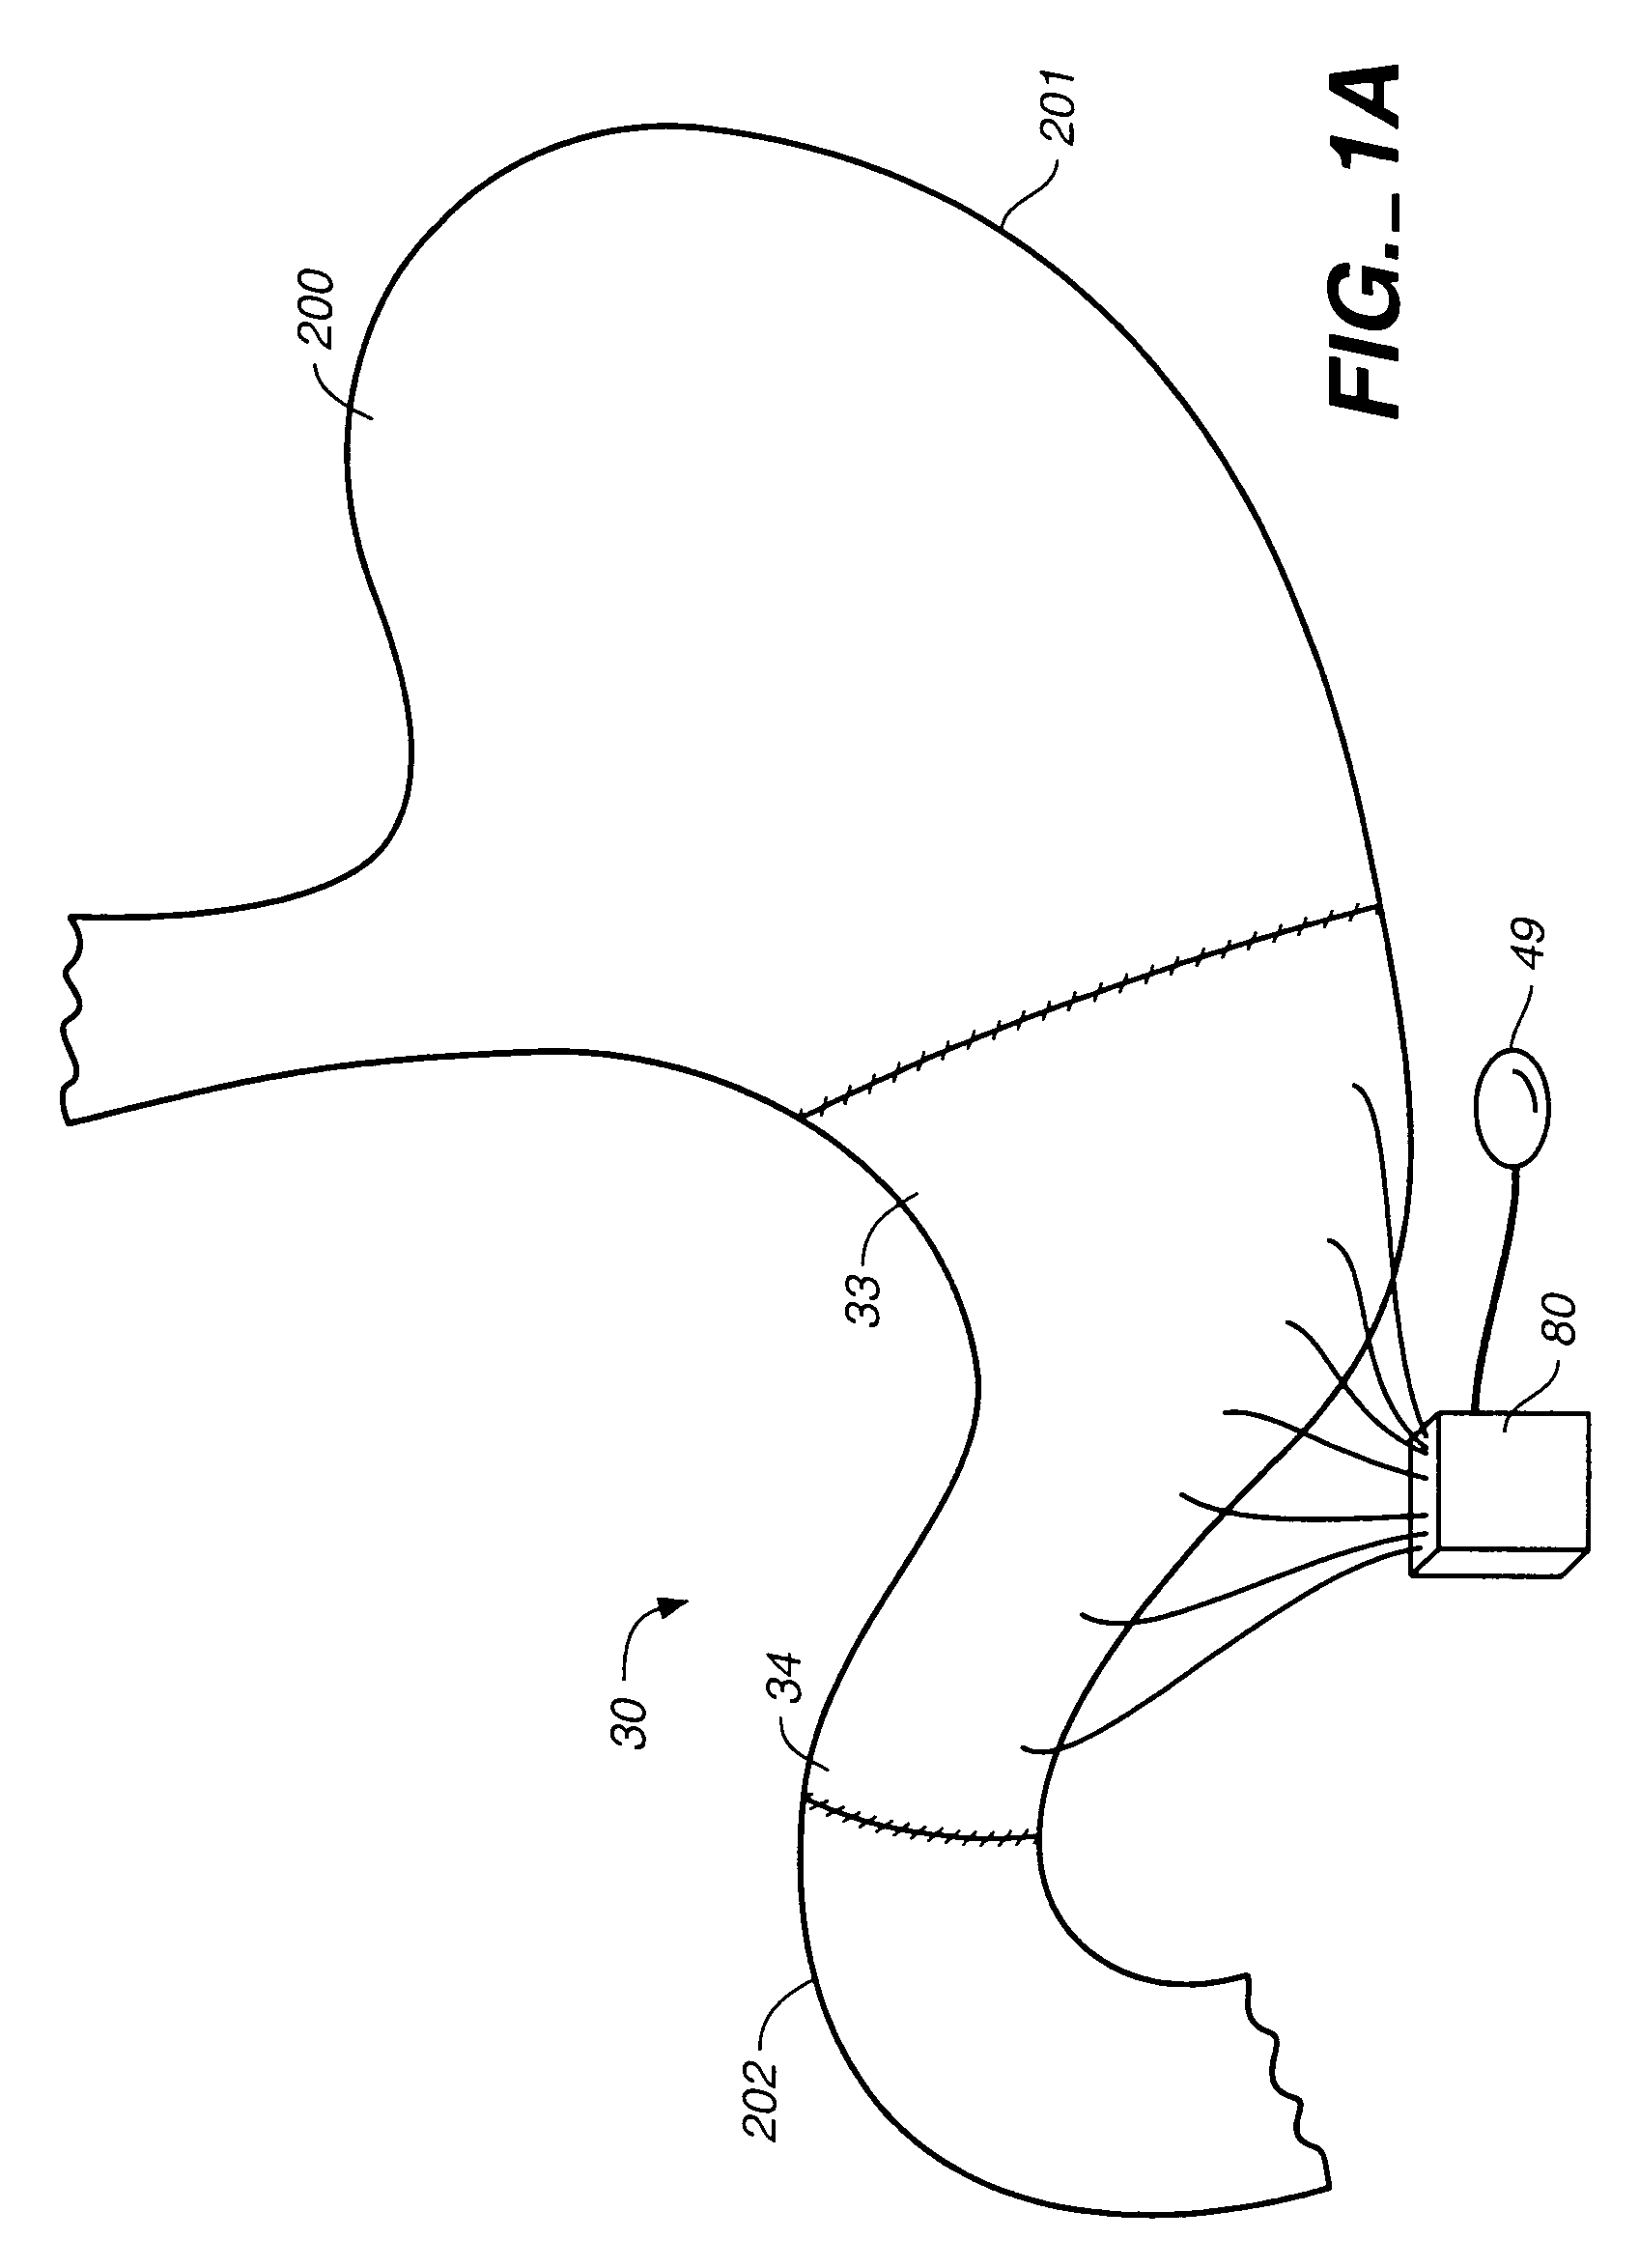 Stomach peristalsis device and method